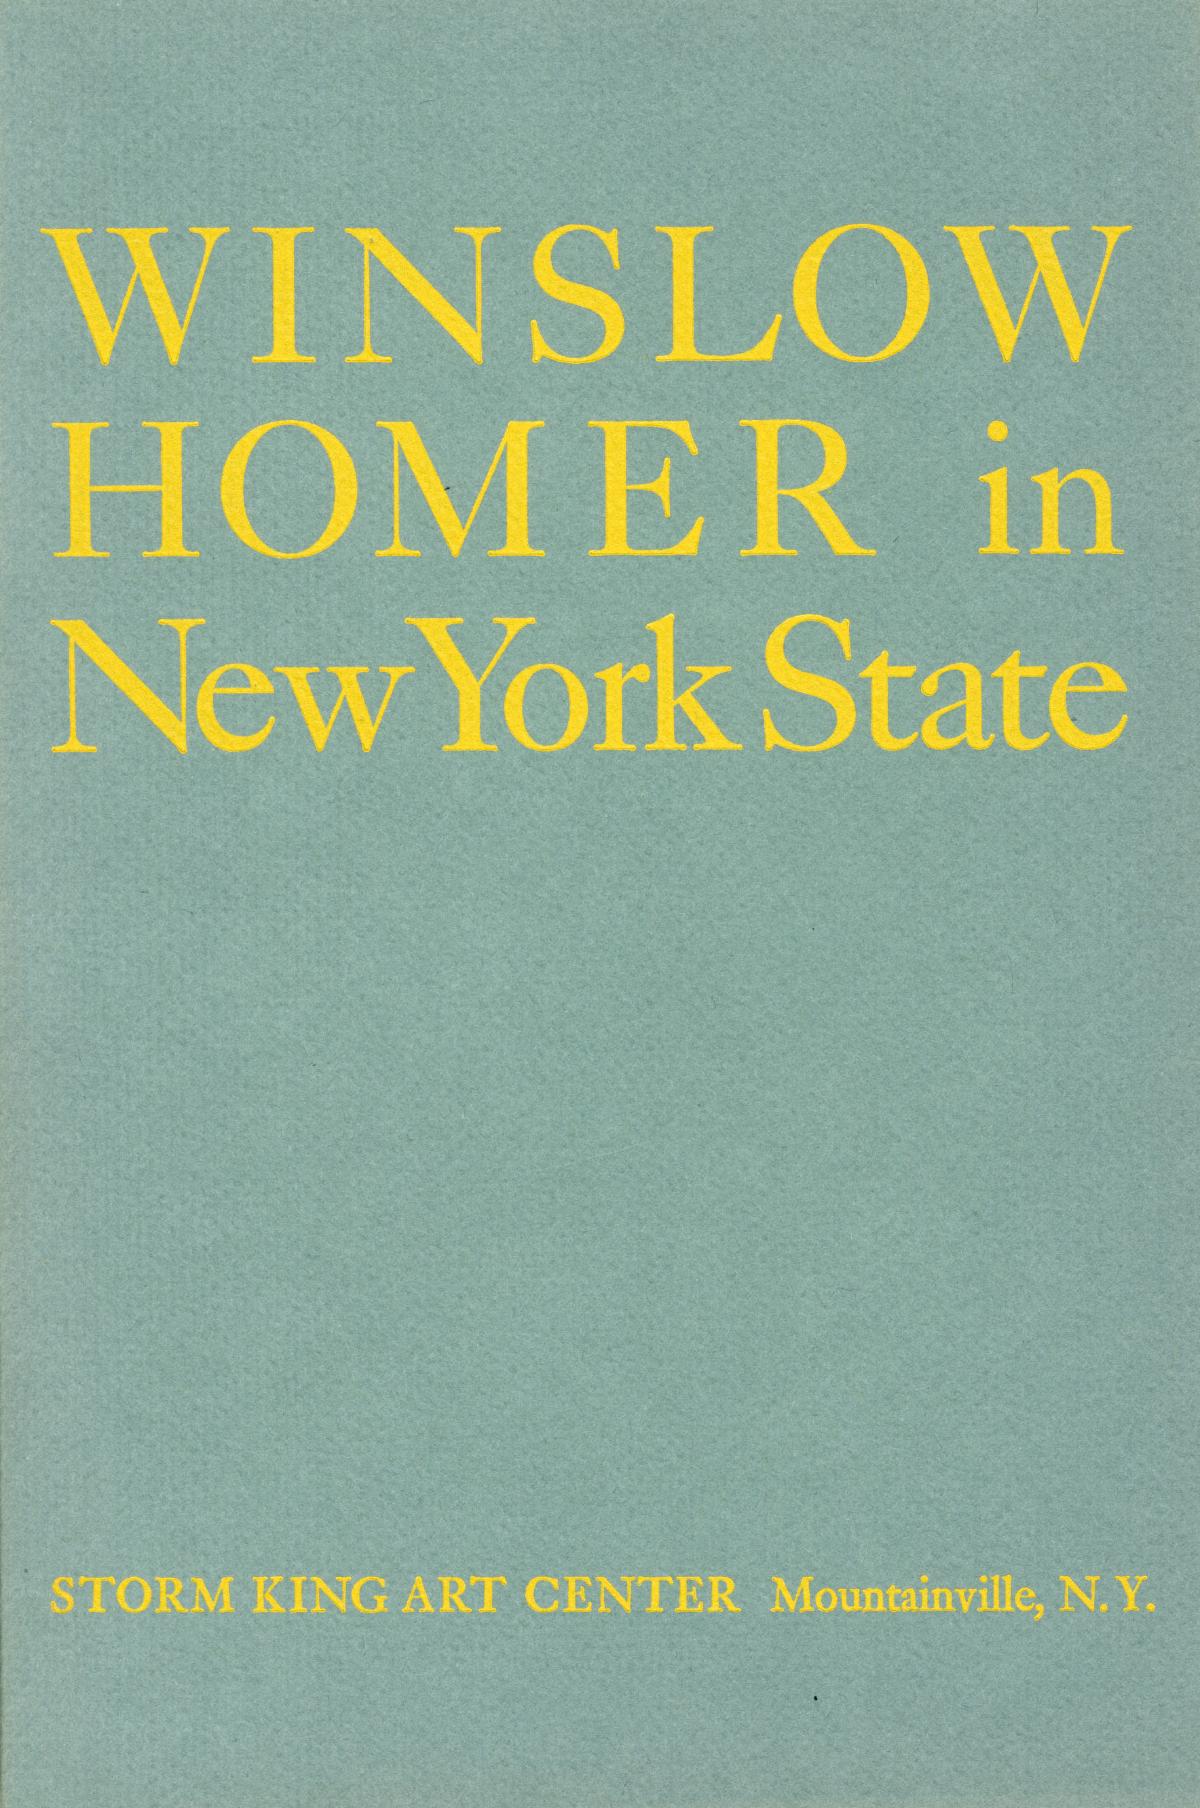 Winslow Homer in New York State, June 29-August 22, 1963, catalogue cover